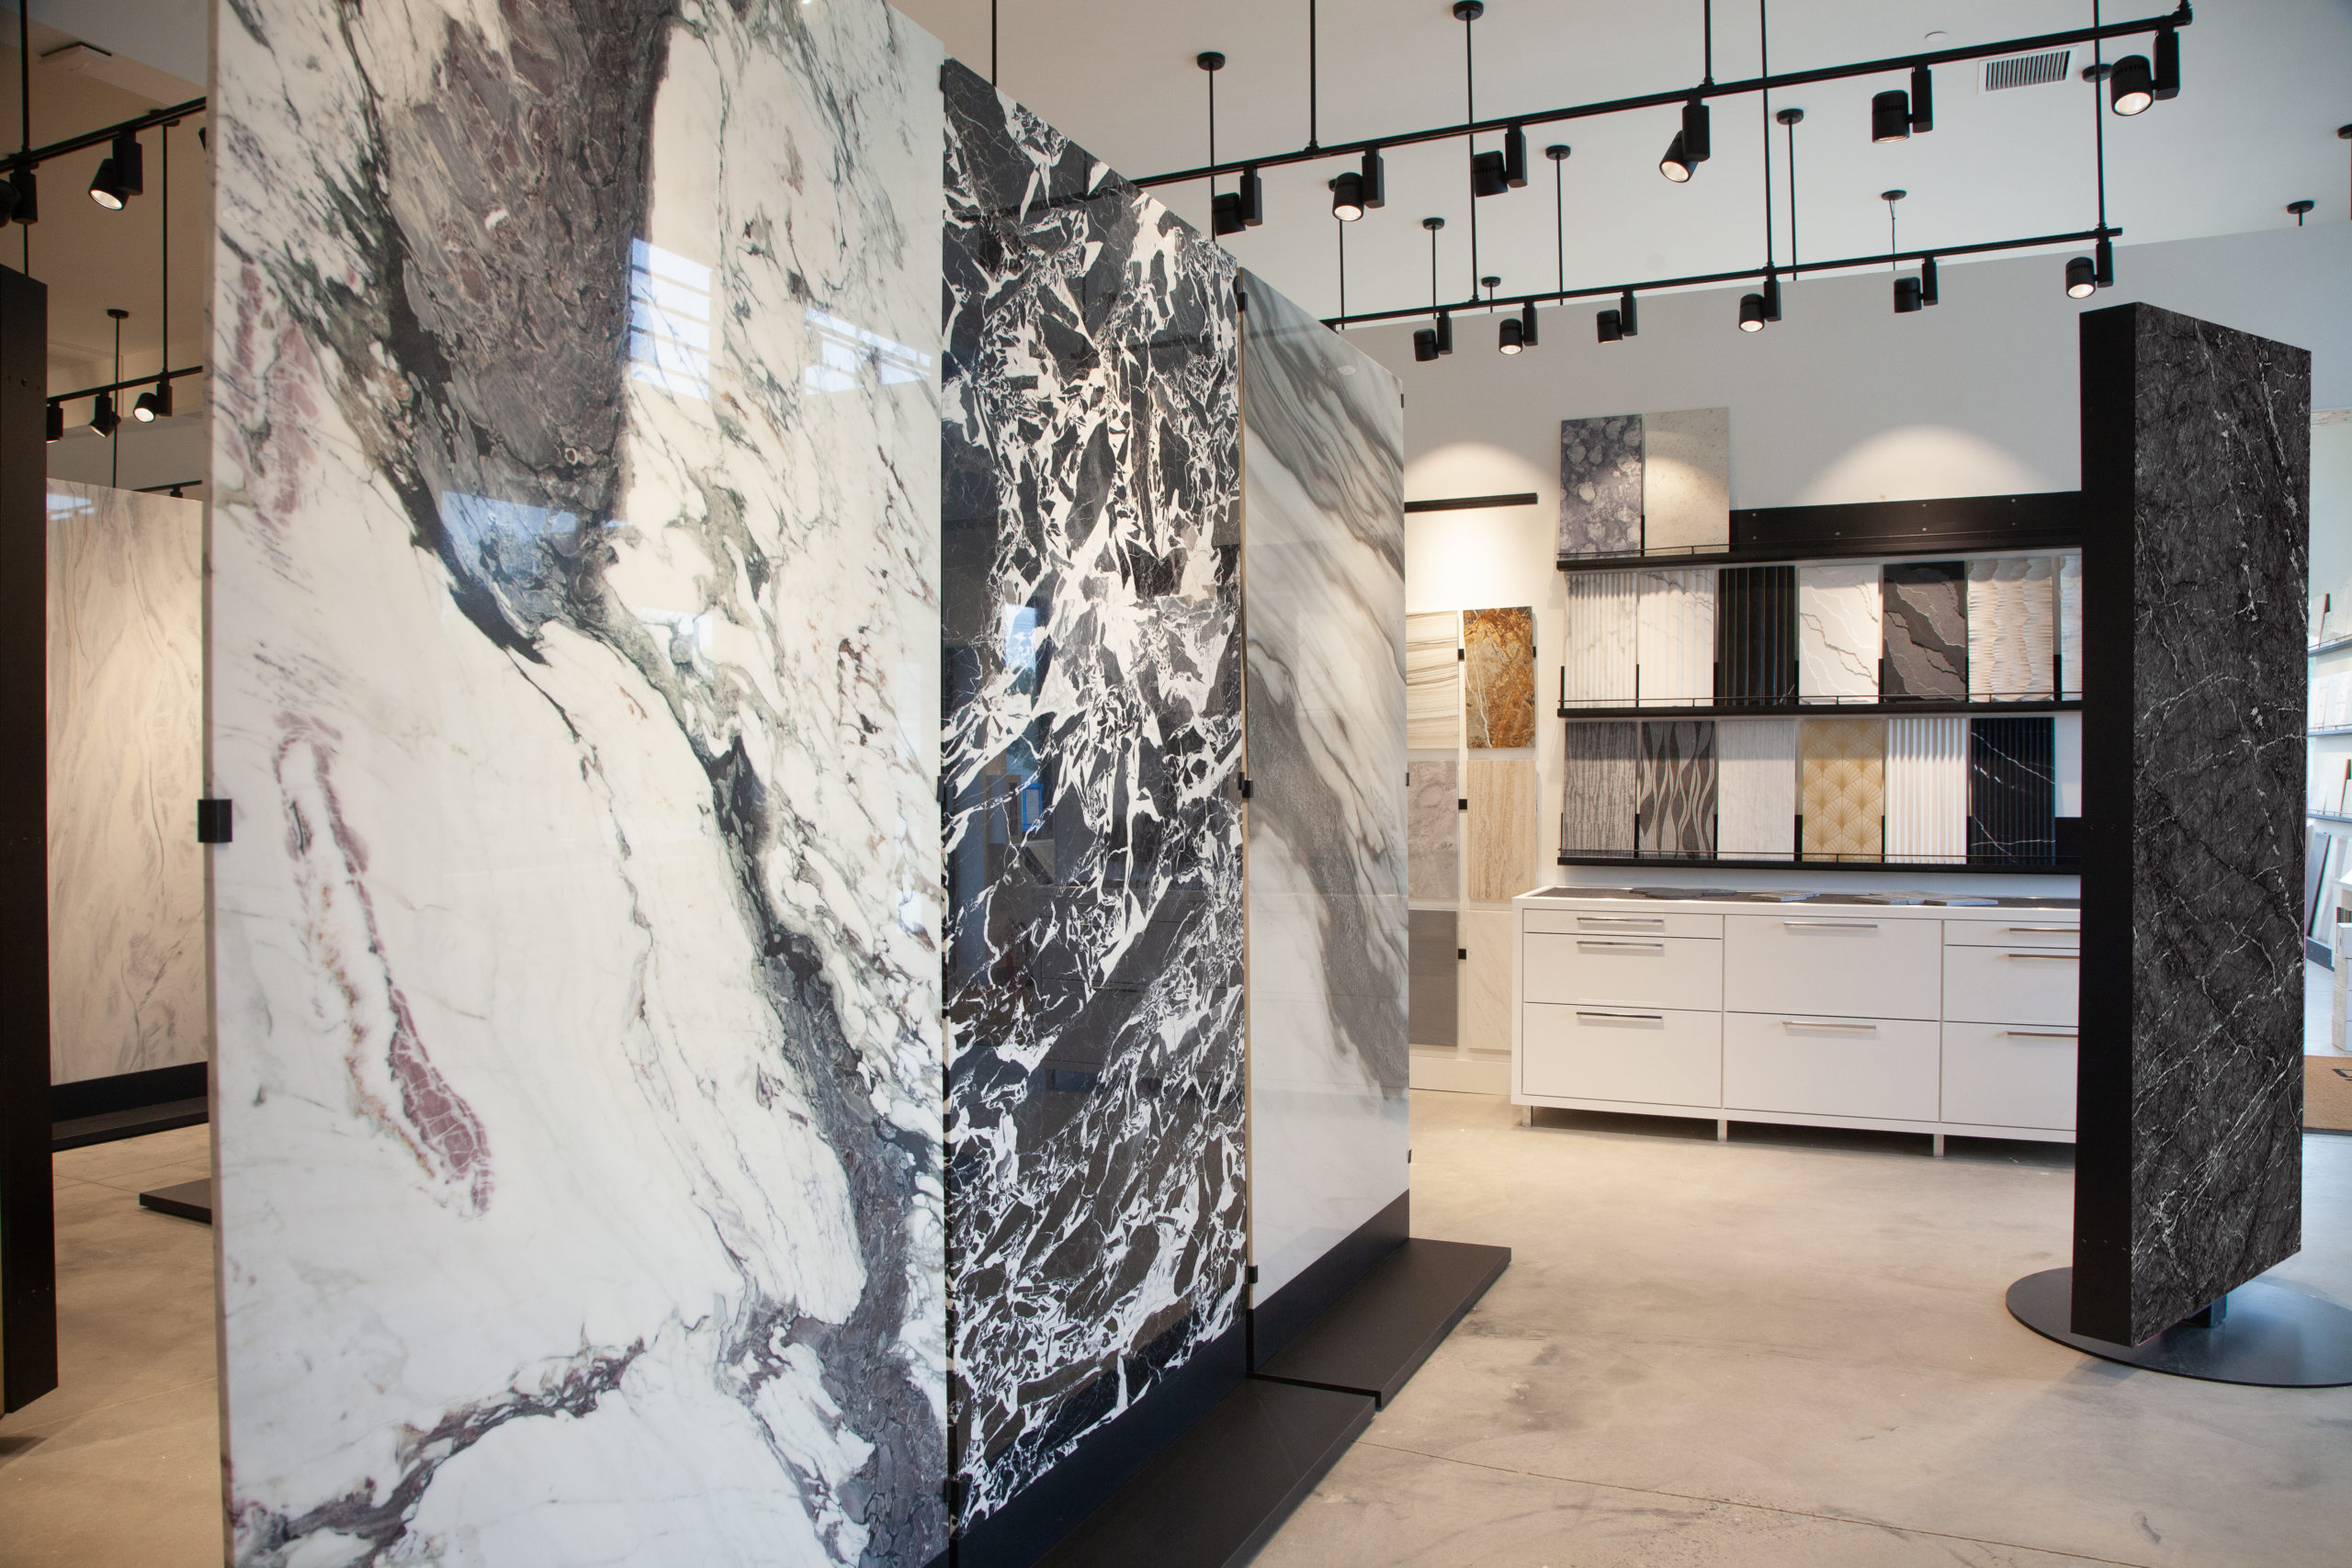 Large-scaled porcelain slabs give clients a better sense of how the product will look in their home.